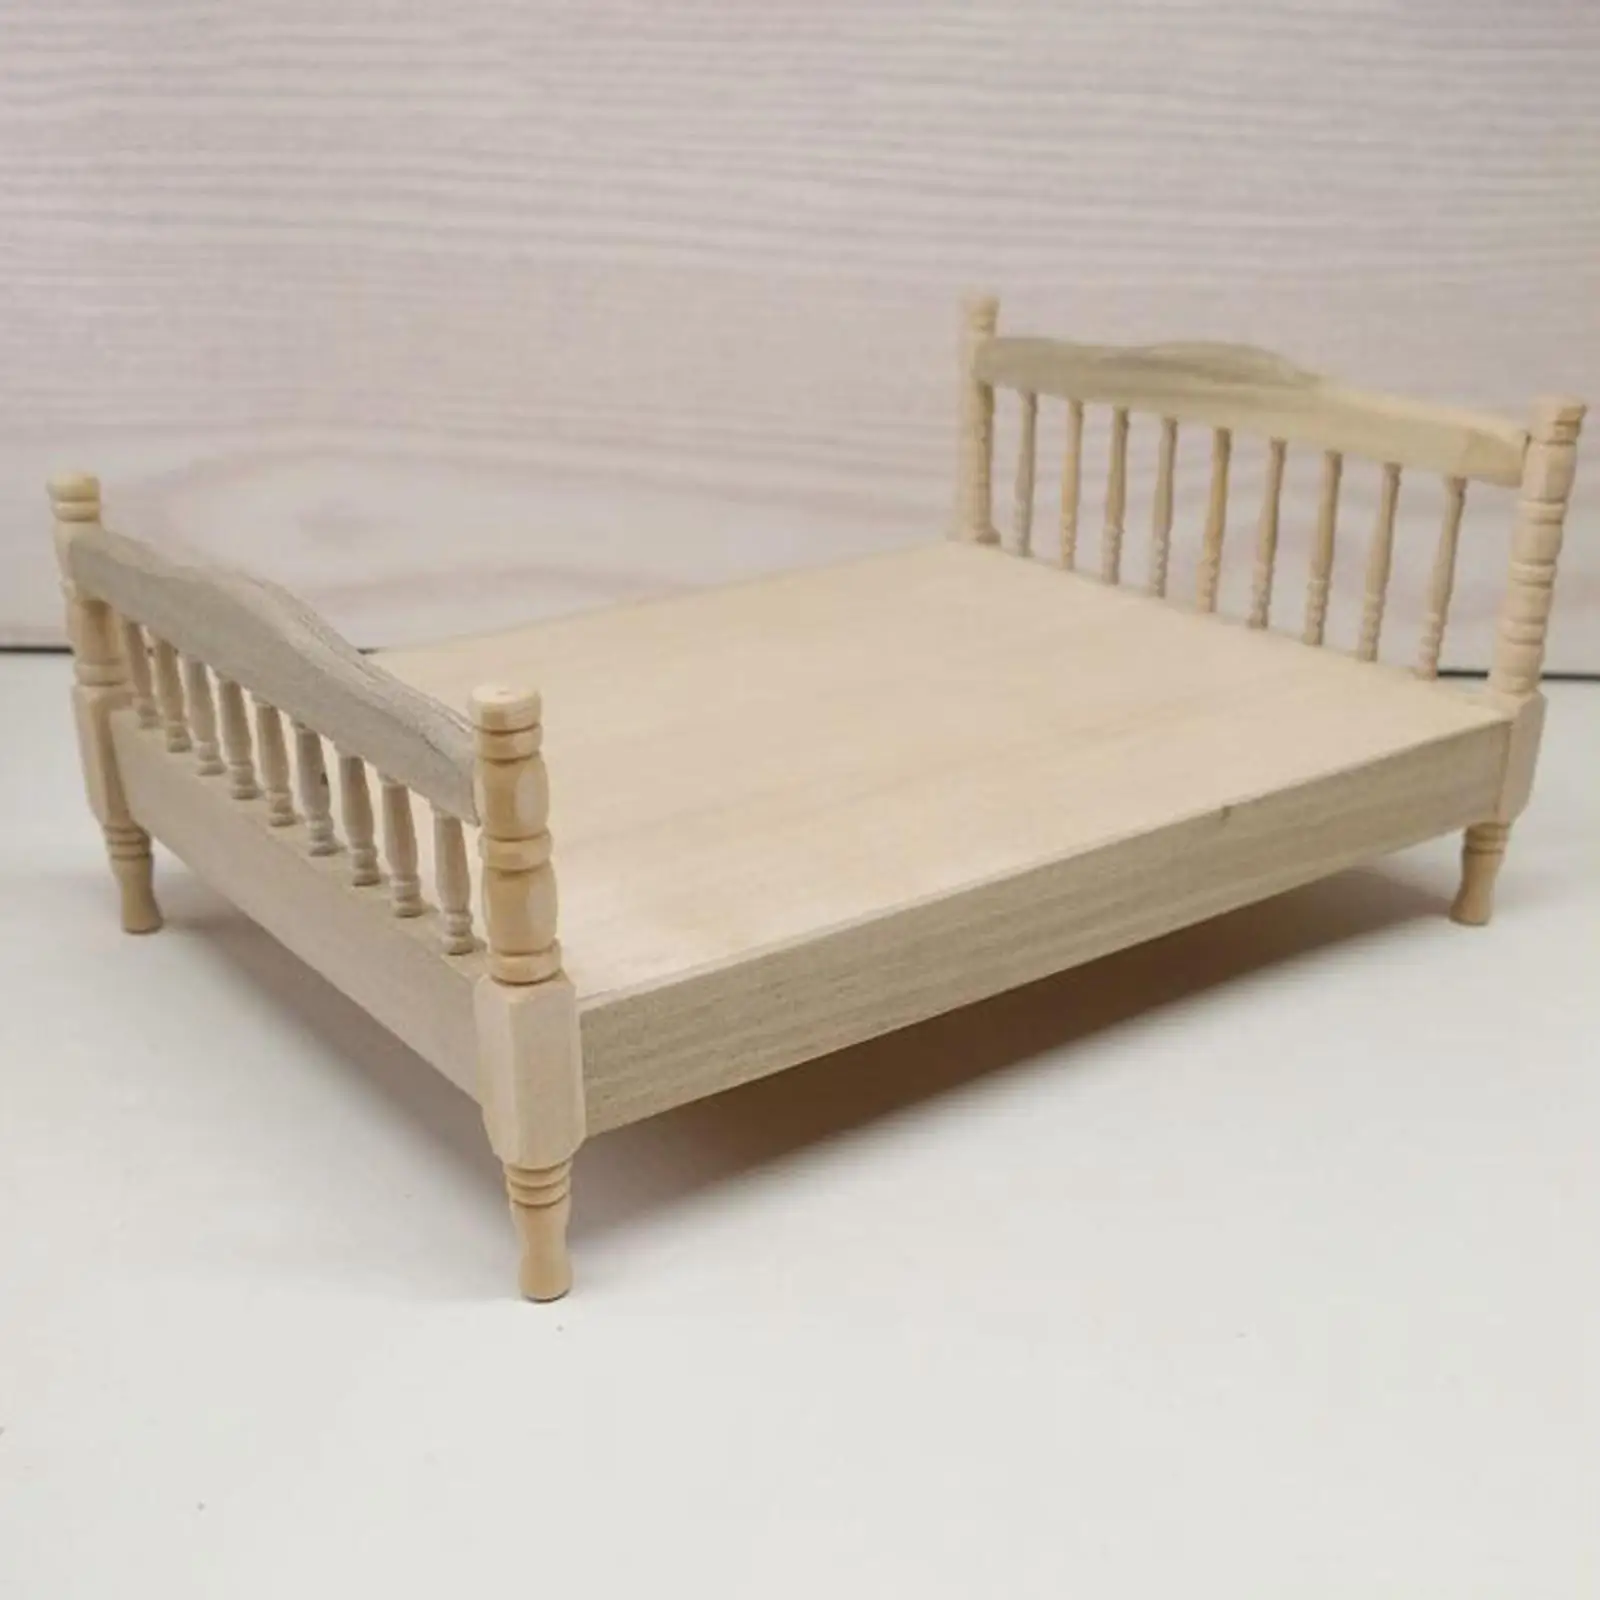 1:12 Dollhouse Double Bed Model for Railway Station Layout DIY Projects